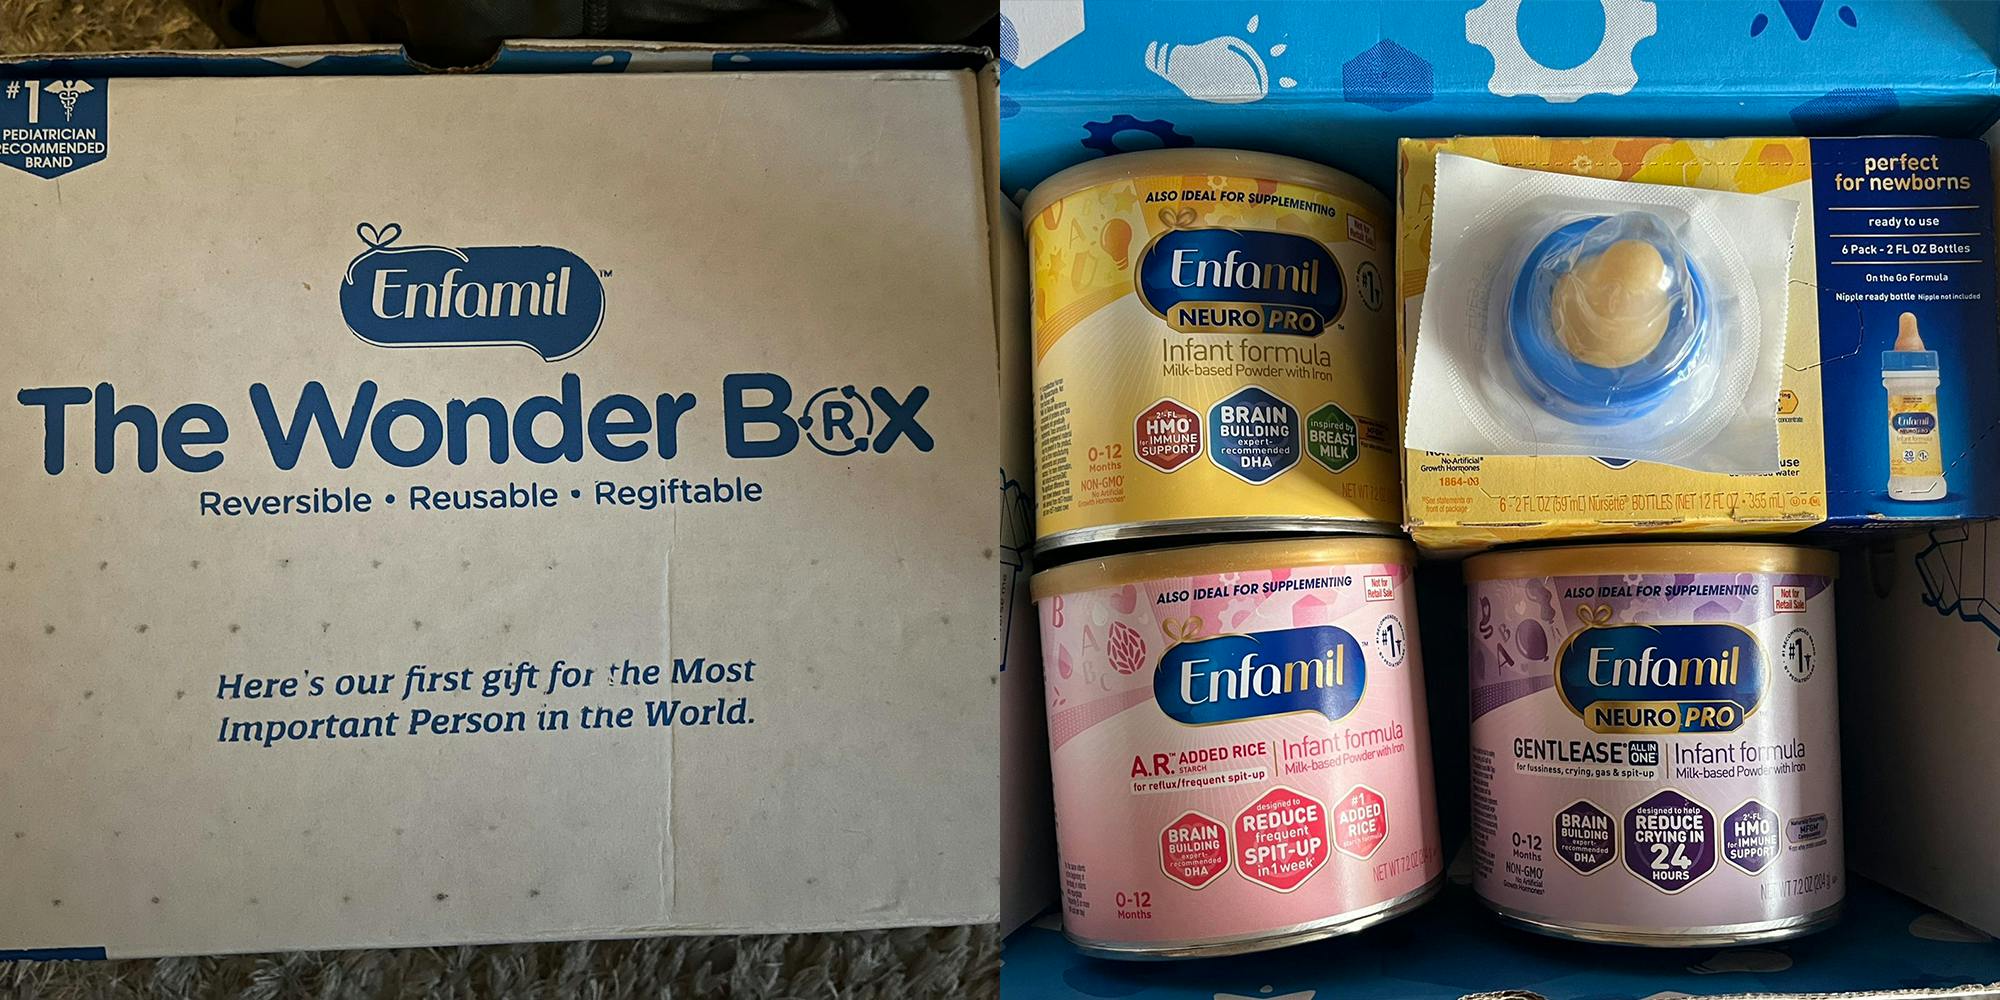 Carboard box with "Enfamil The Wonder Box - Reversible - Reusable - Regiftable - Here's our first gift for the Most Important Person in the World." (l) Enfamil formula and bottle nipple inside box (r)